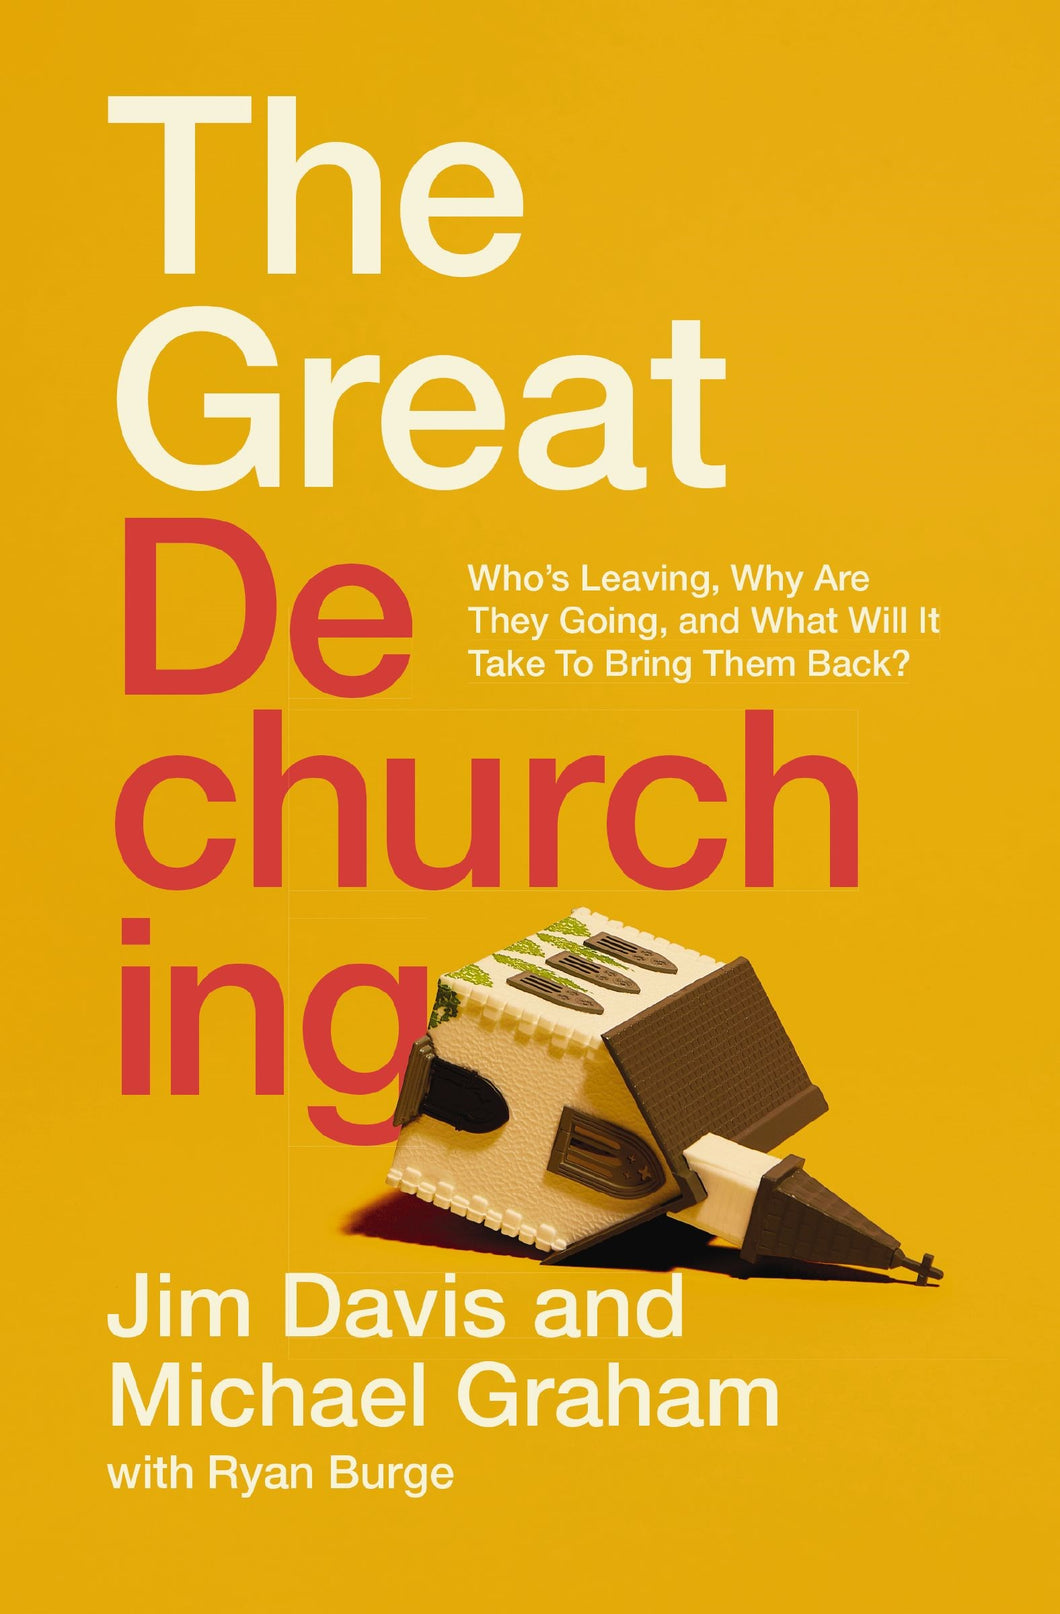 The Great Dechurching